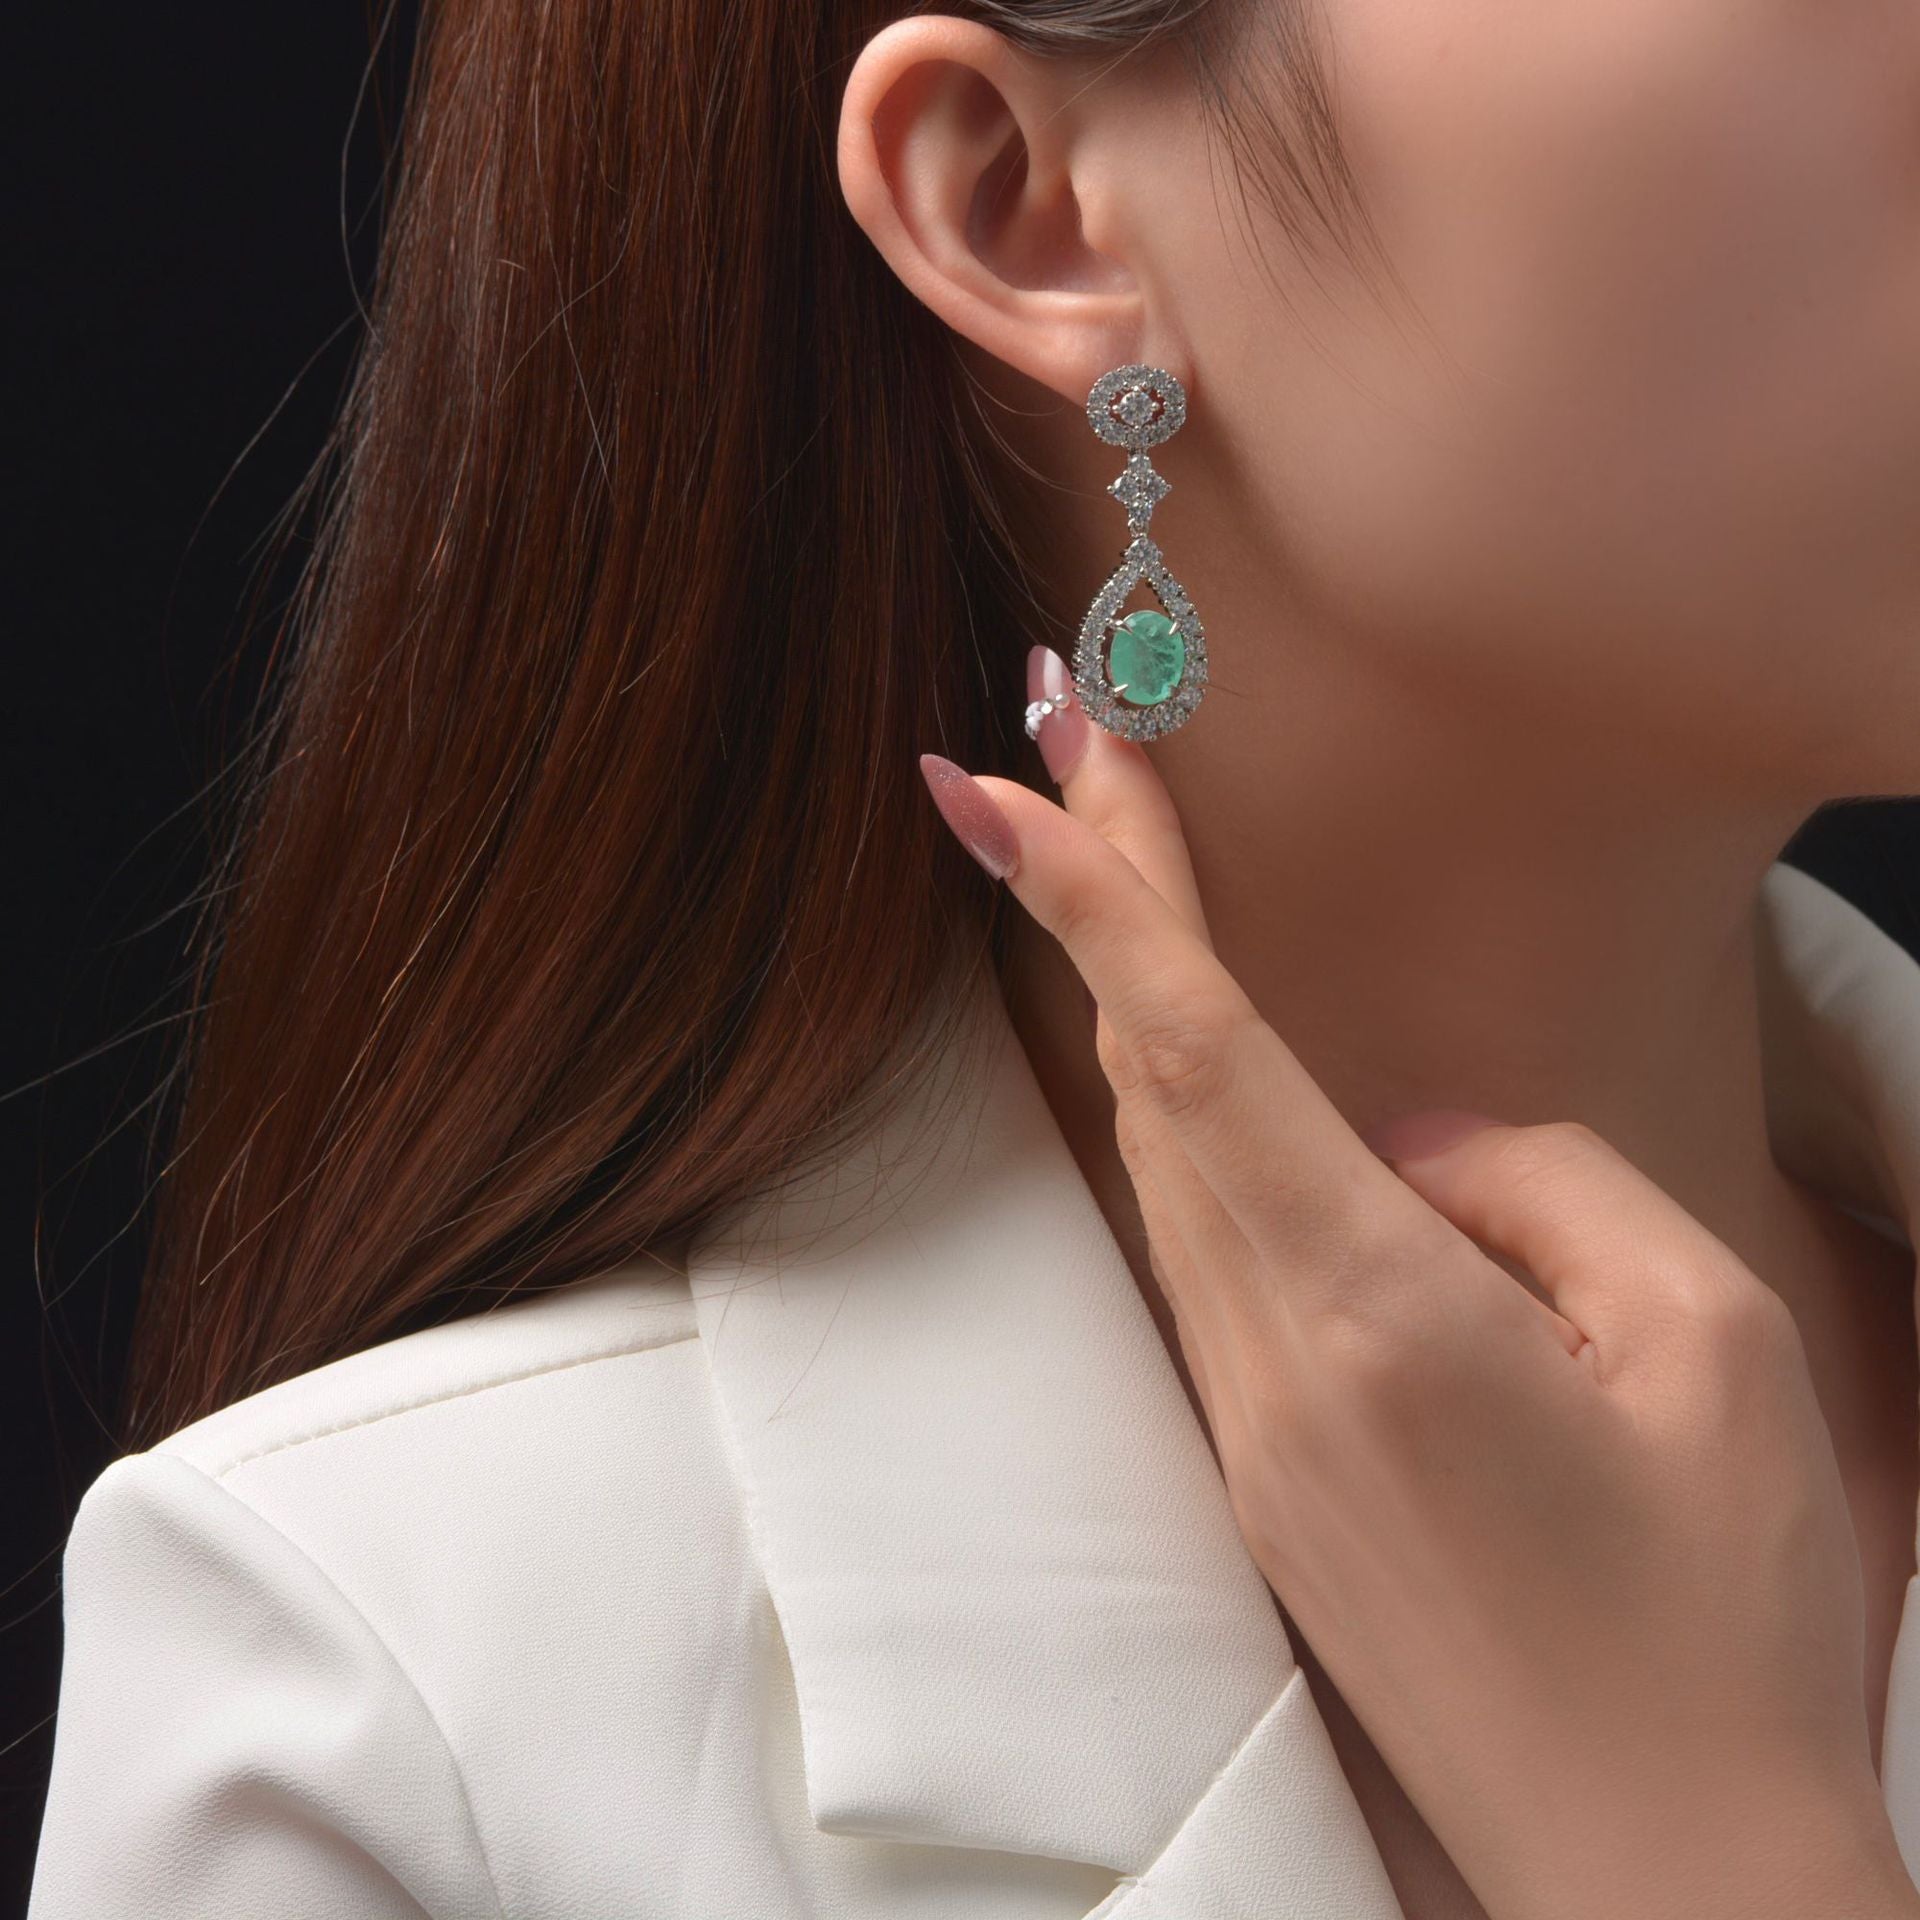 Amazon.com: Luxury! Inspired Paraiba Tourmaline Earrings,High Imitation Paraiba  Tourmaline Earrings, S925 Sterling Silver,Earrings For Women : Handmade  Products